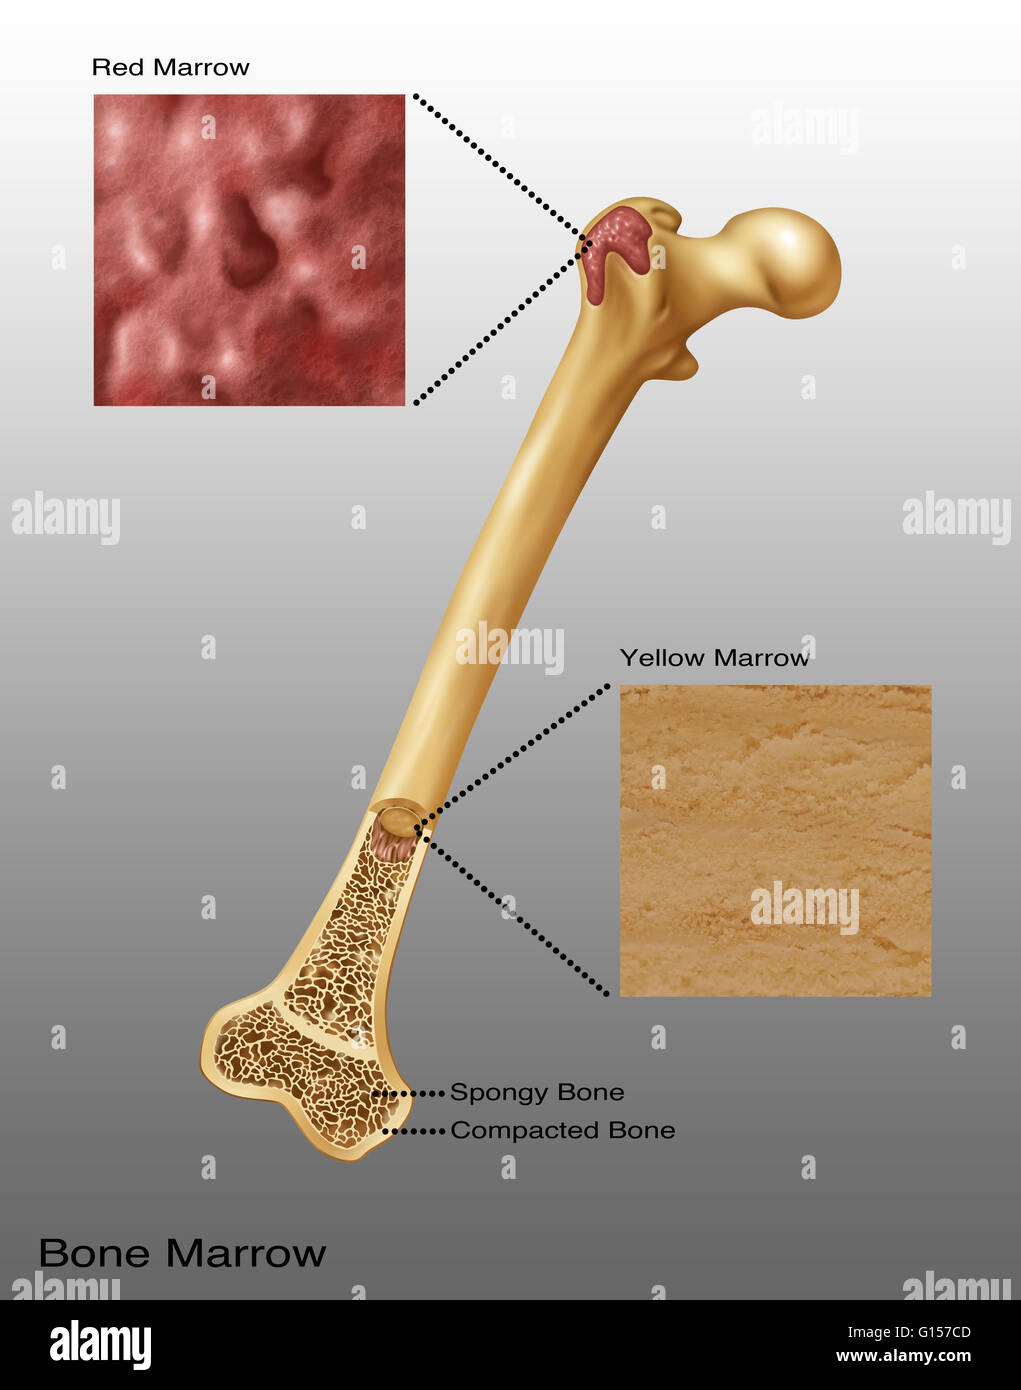 Illustration of bone marrow. Top diagram shows red bone marrow, Bottom  diagram shows yellow marrow. Spongy bone and compacted bone also visible  Stock Photo - Alamy